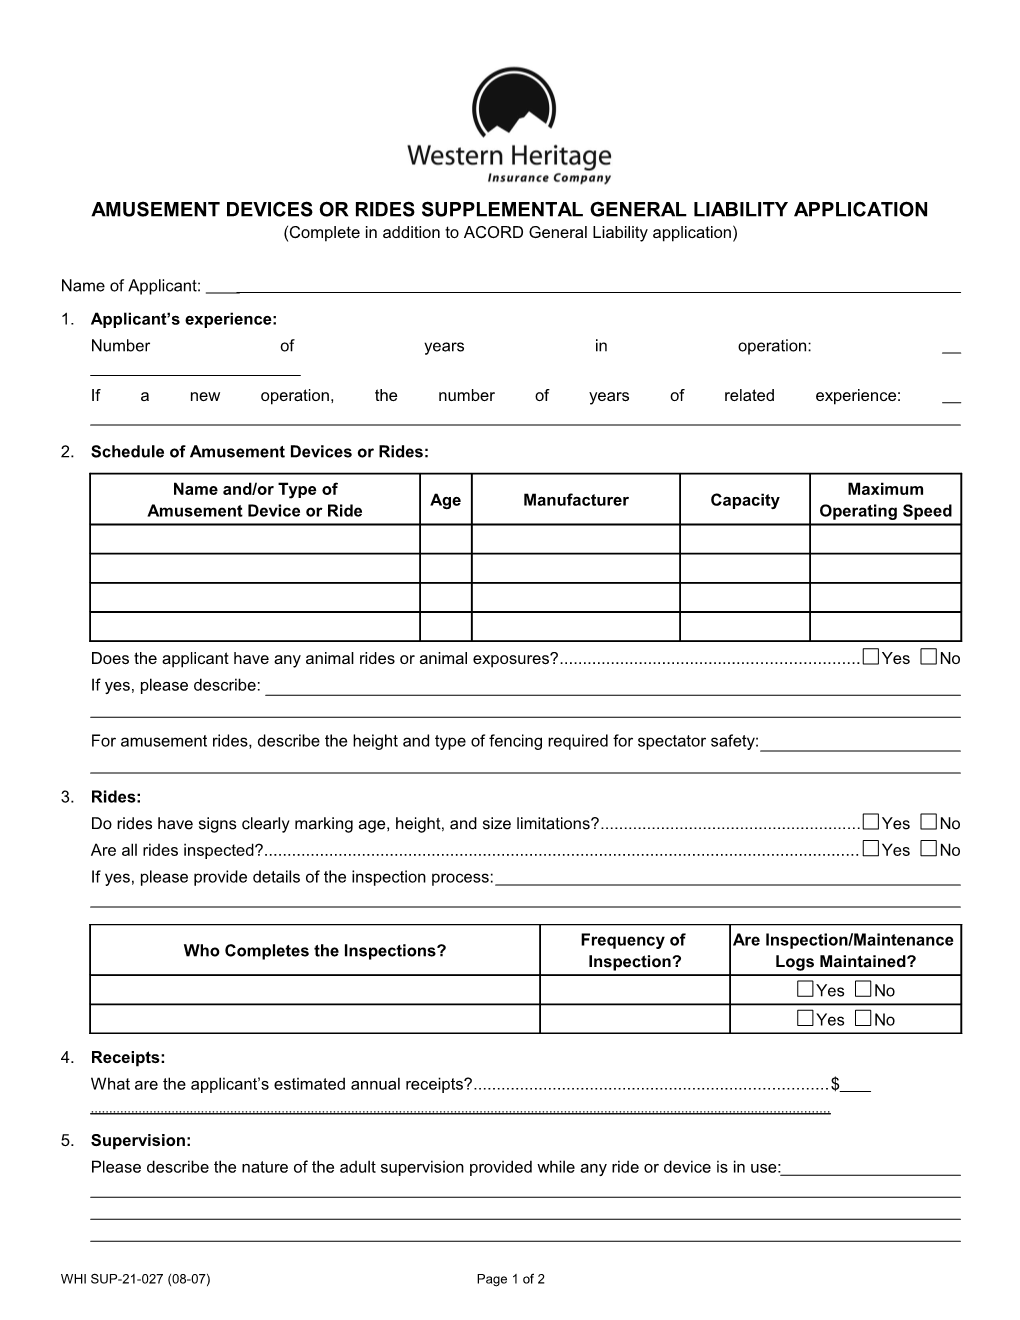 Amusement Devices Or Rides Supplemental General Liability Application